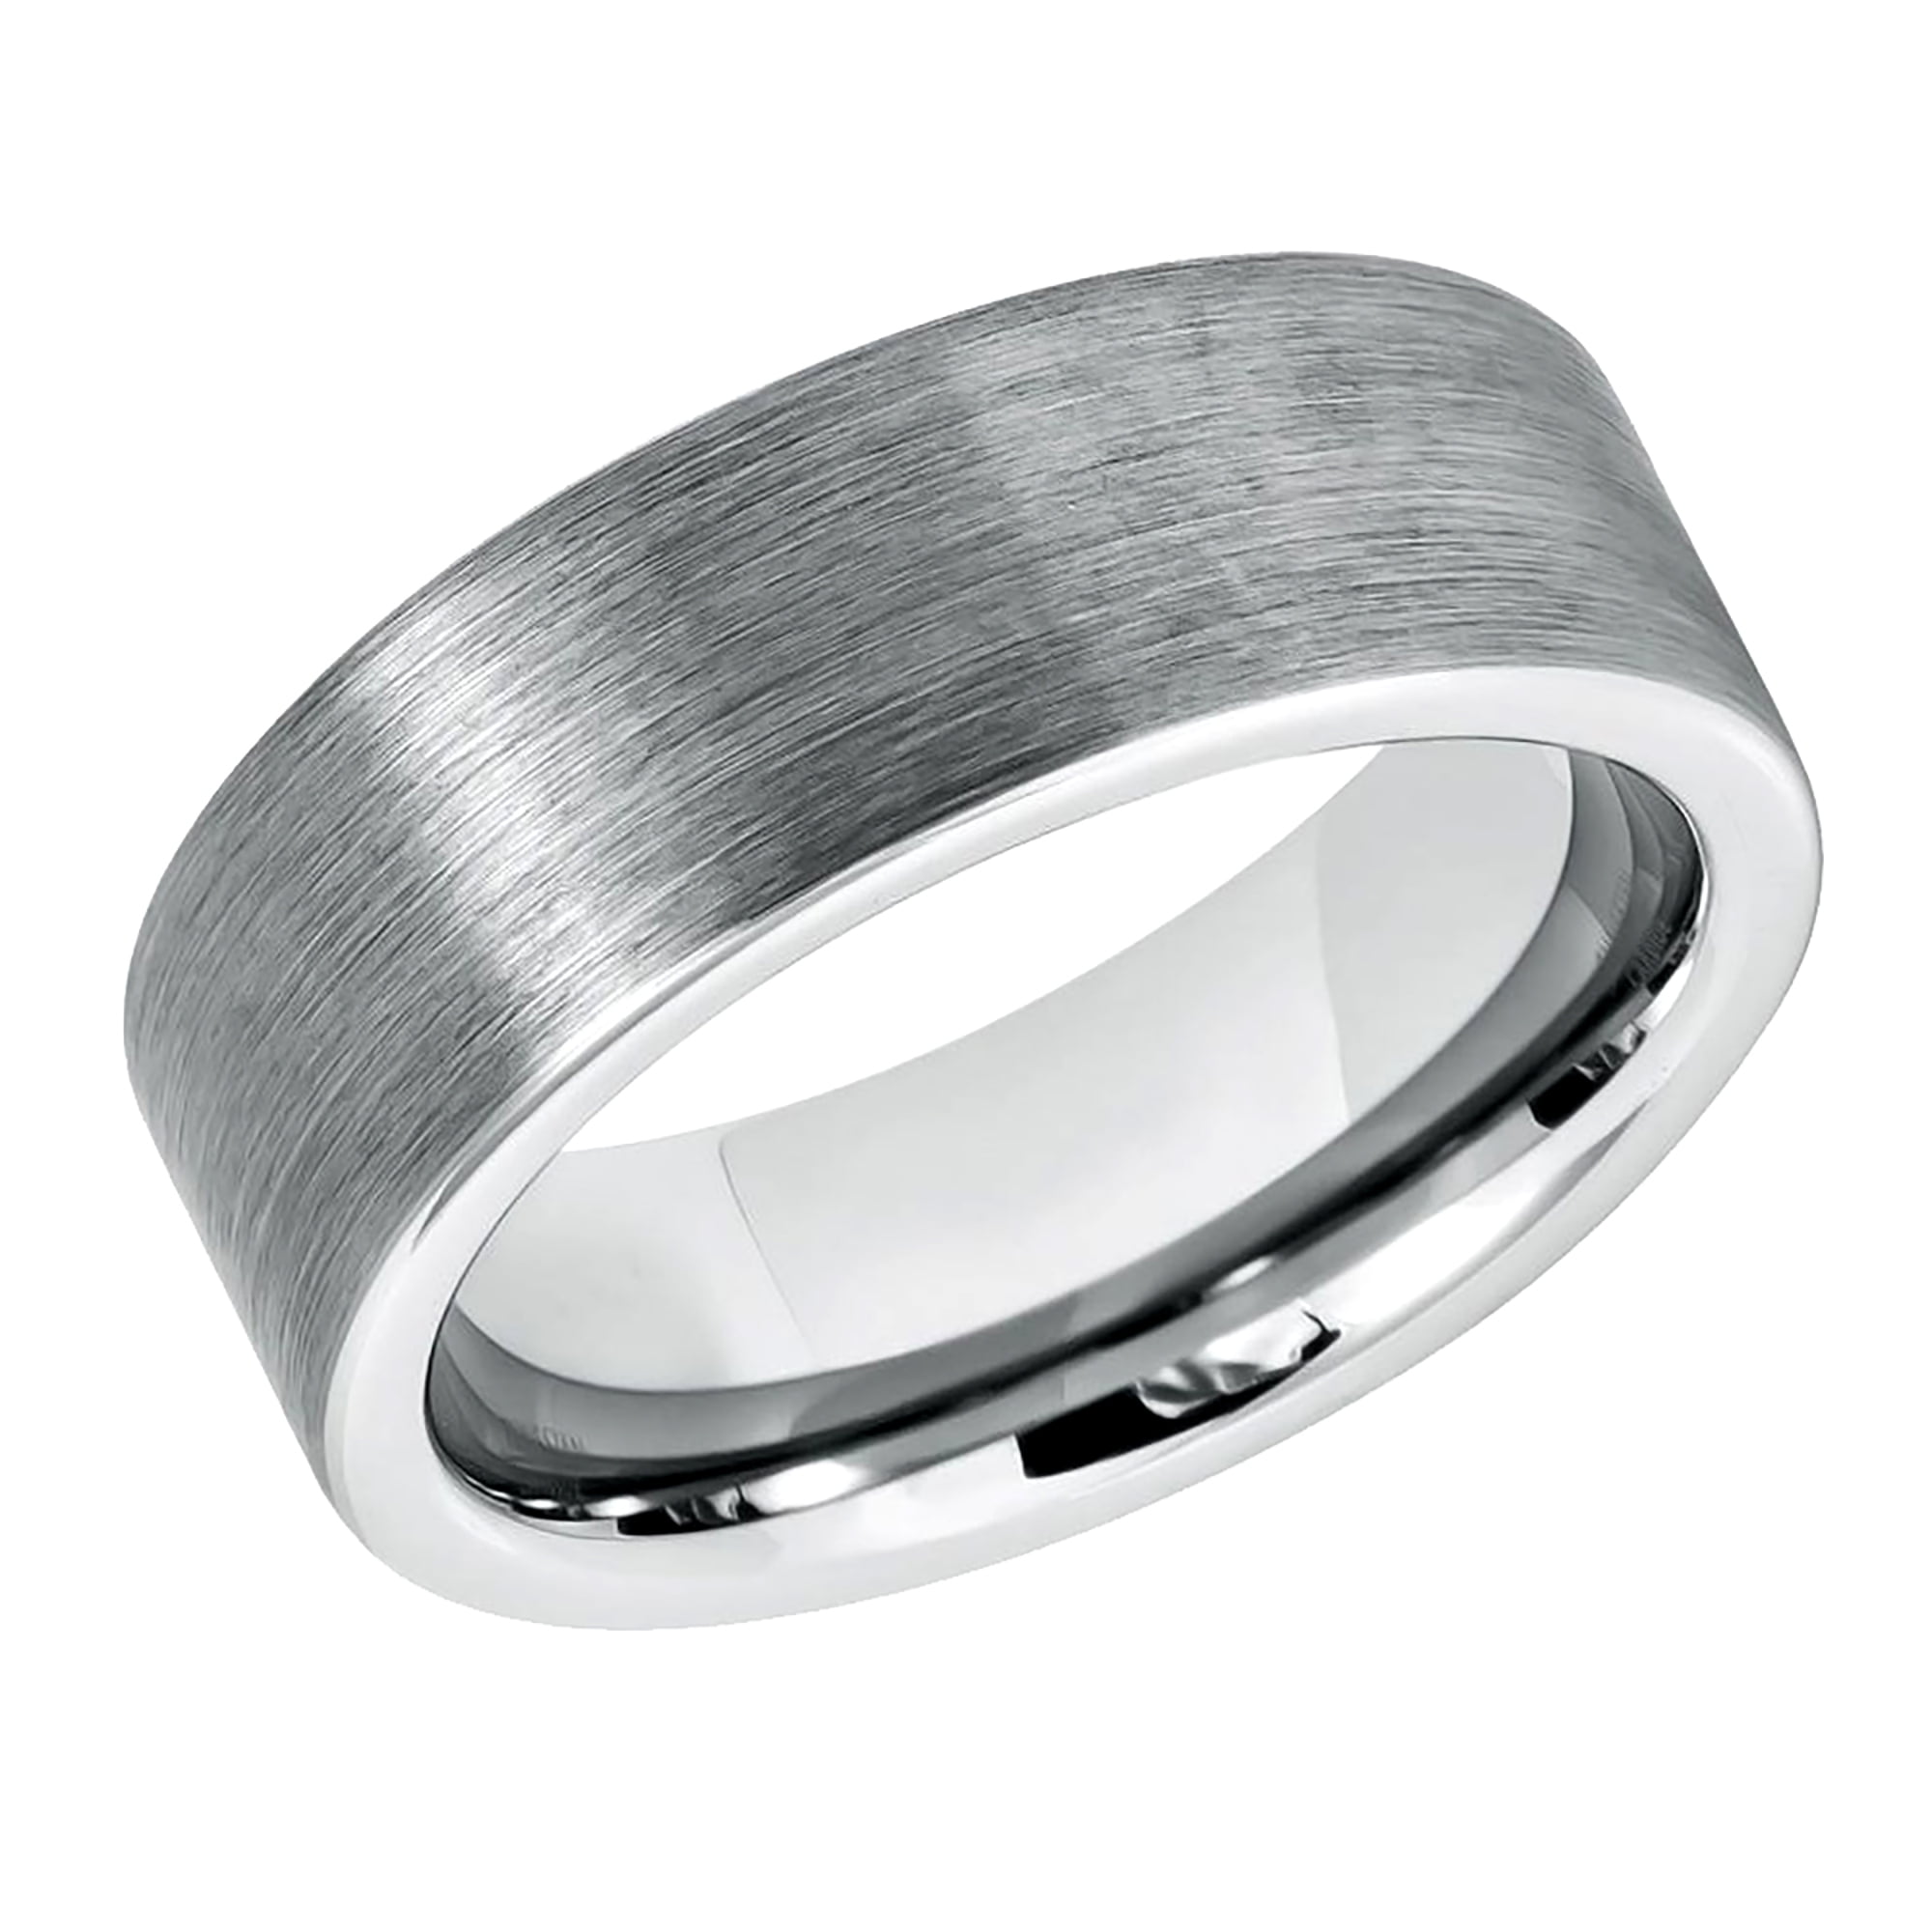 Details about   Simple Punk Men's Polished Stainless Steel Square Finger Rings Jewelry